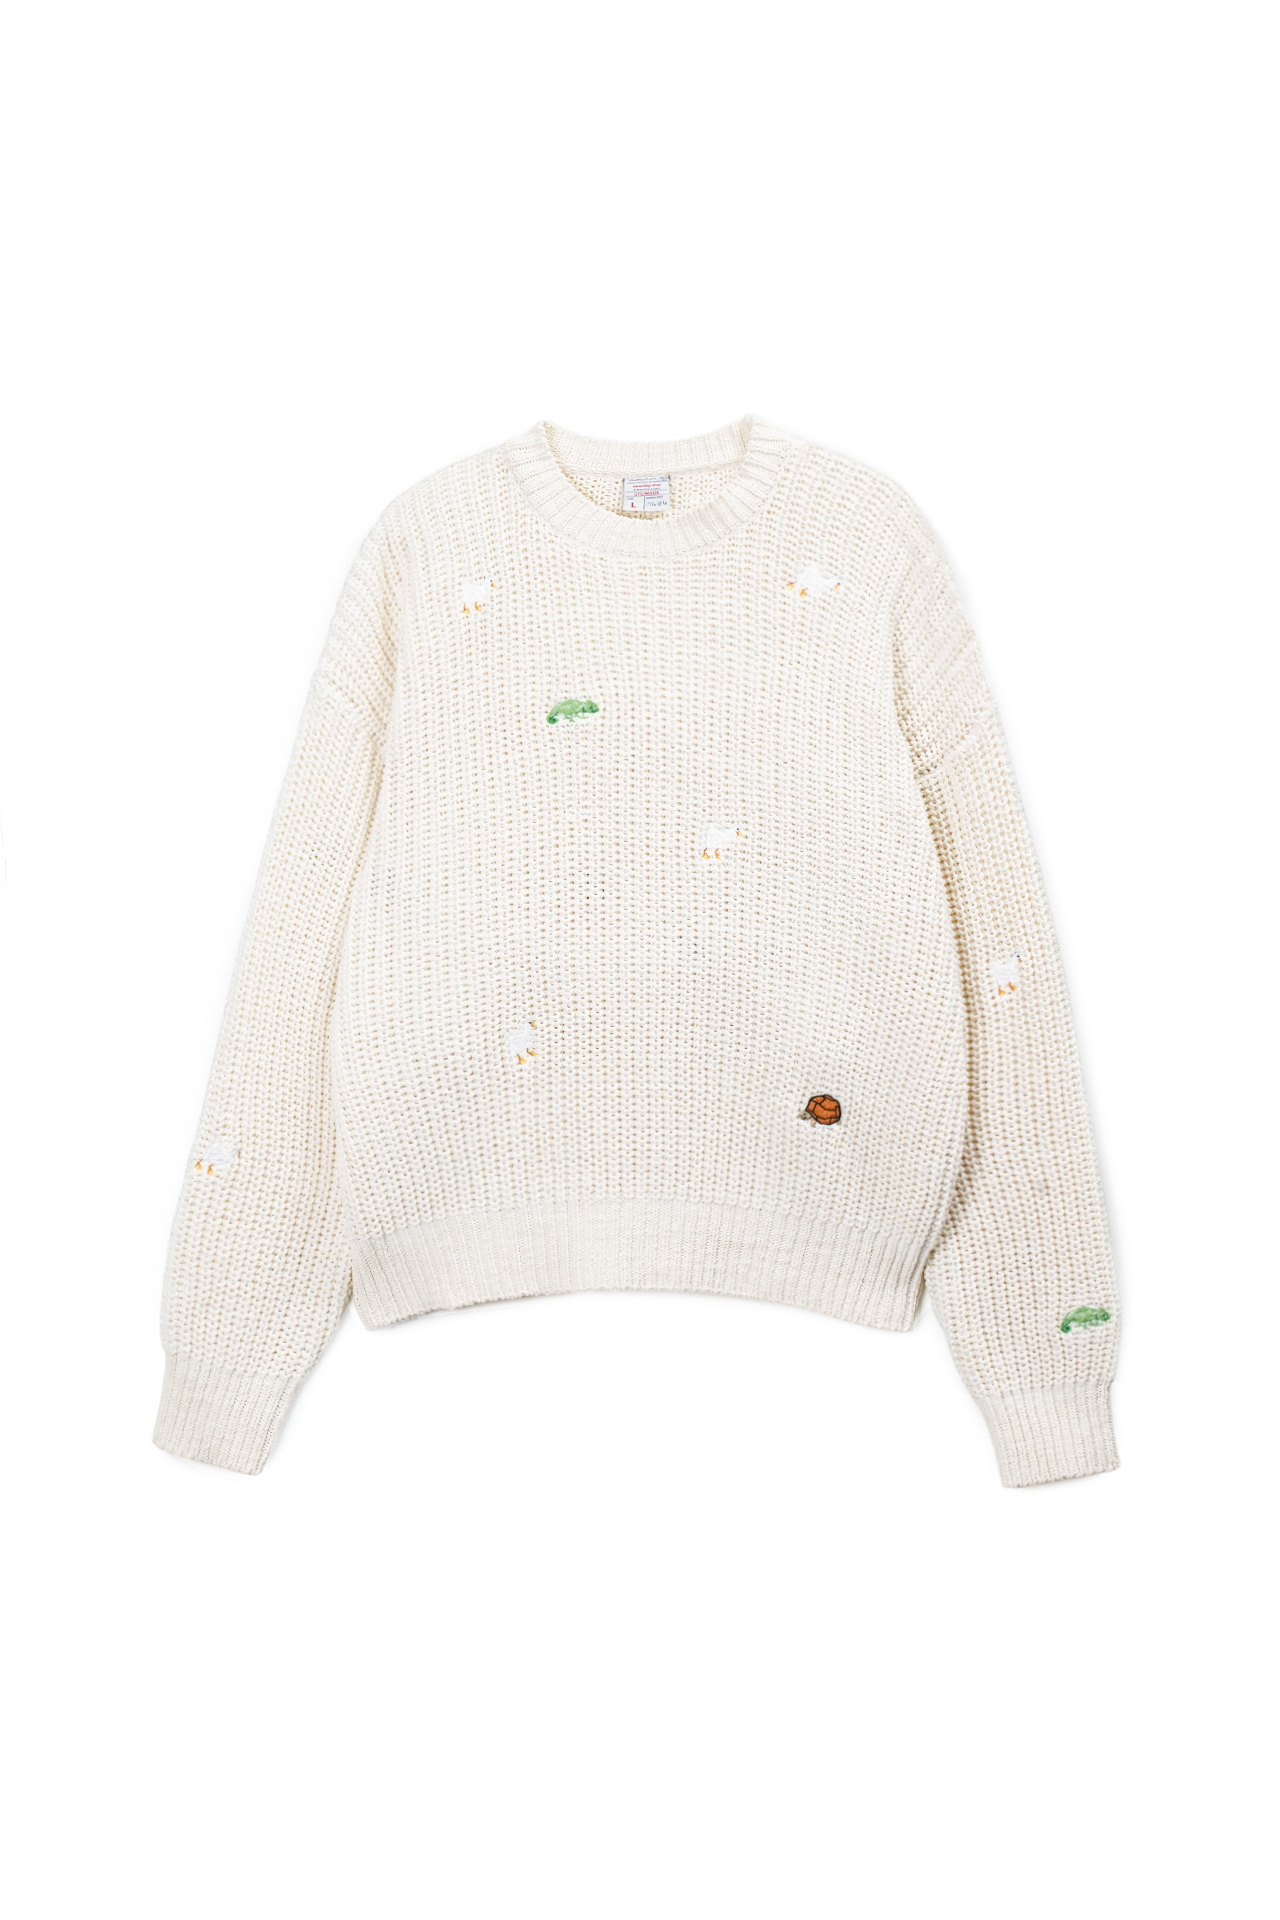 Animal Embroidered Knit Cream